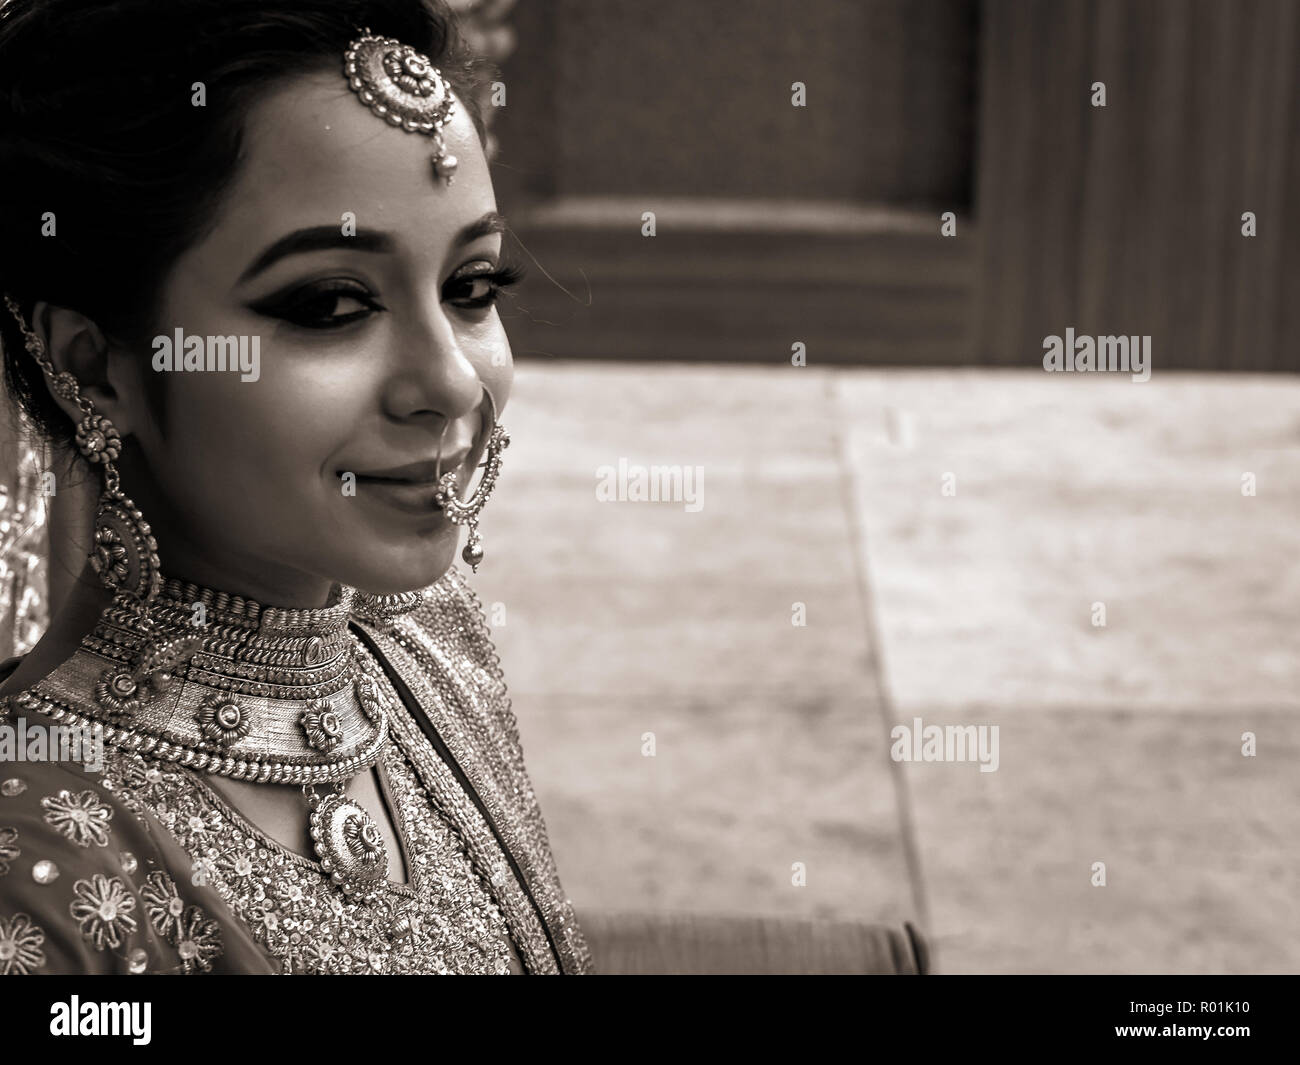 june 032018 durgapur india an unidentified beautiful young indian model poses with indian bridal make up R01K10